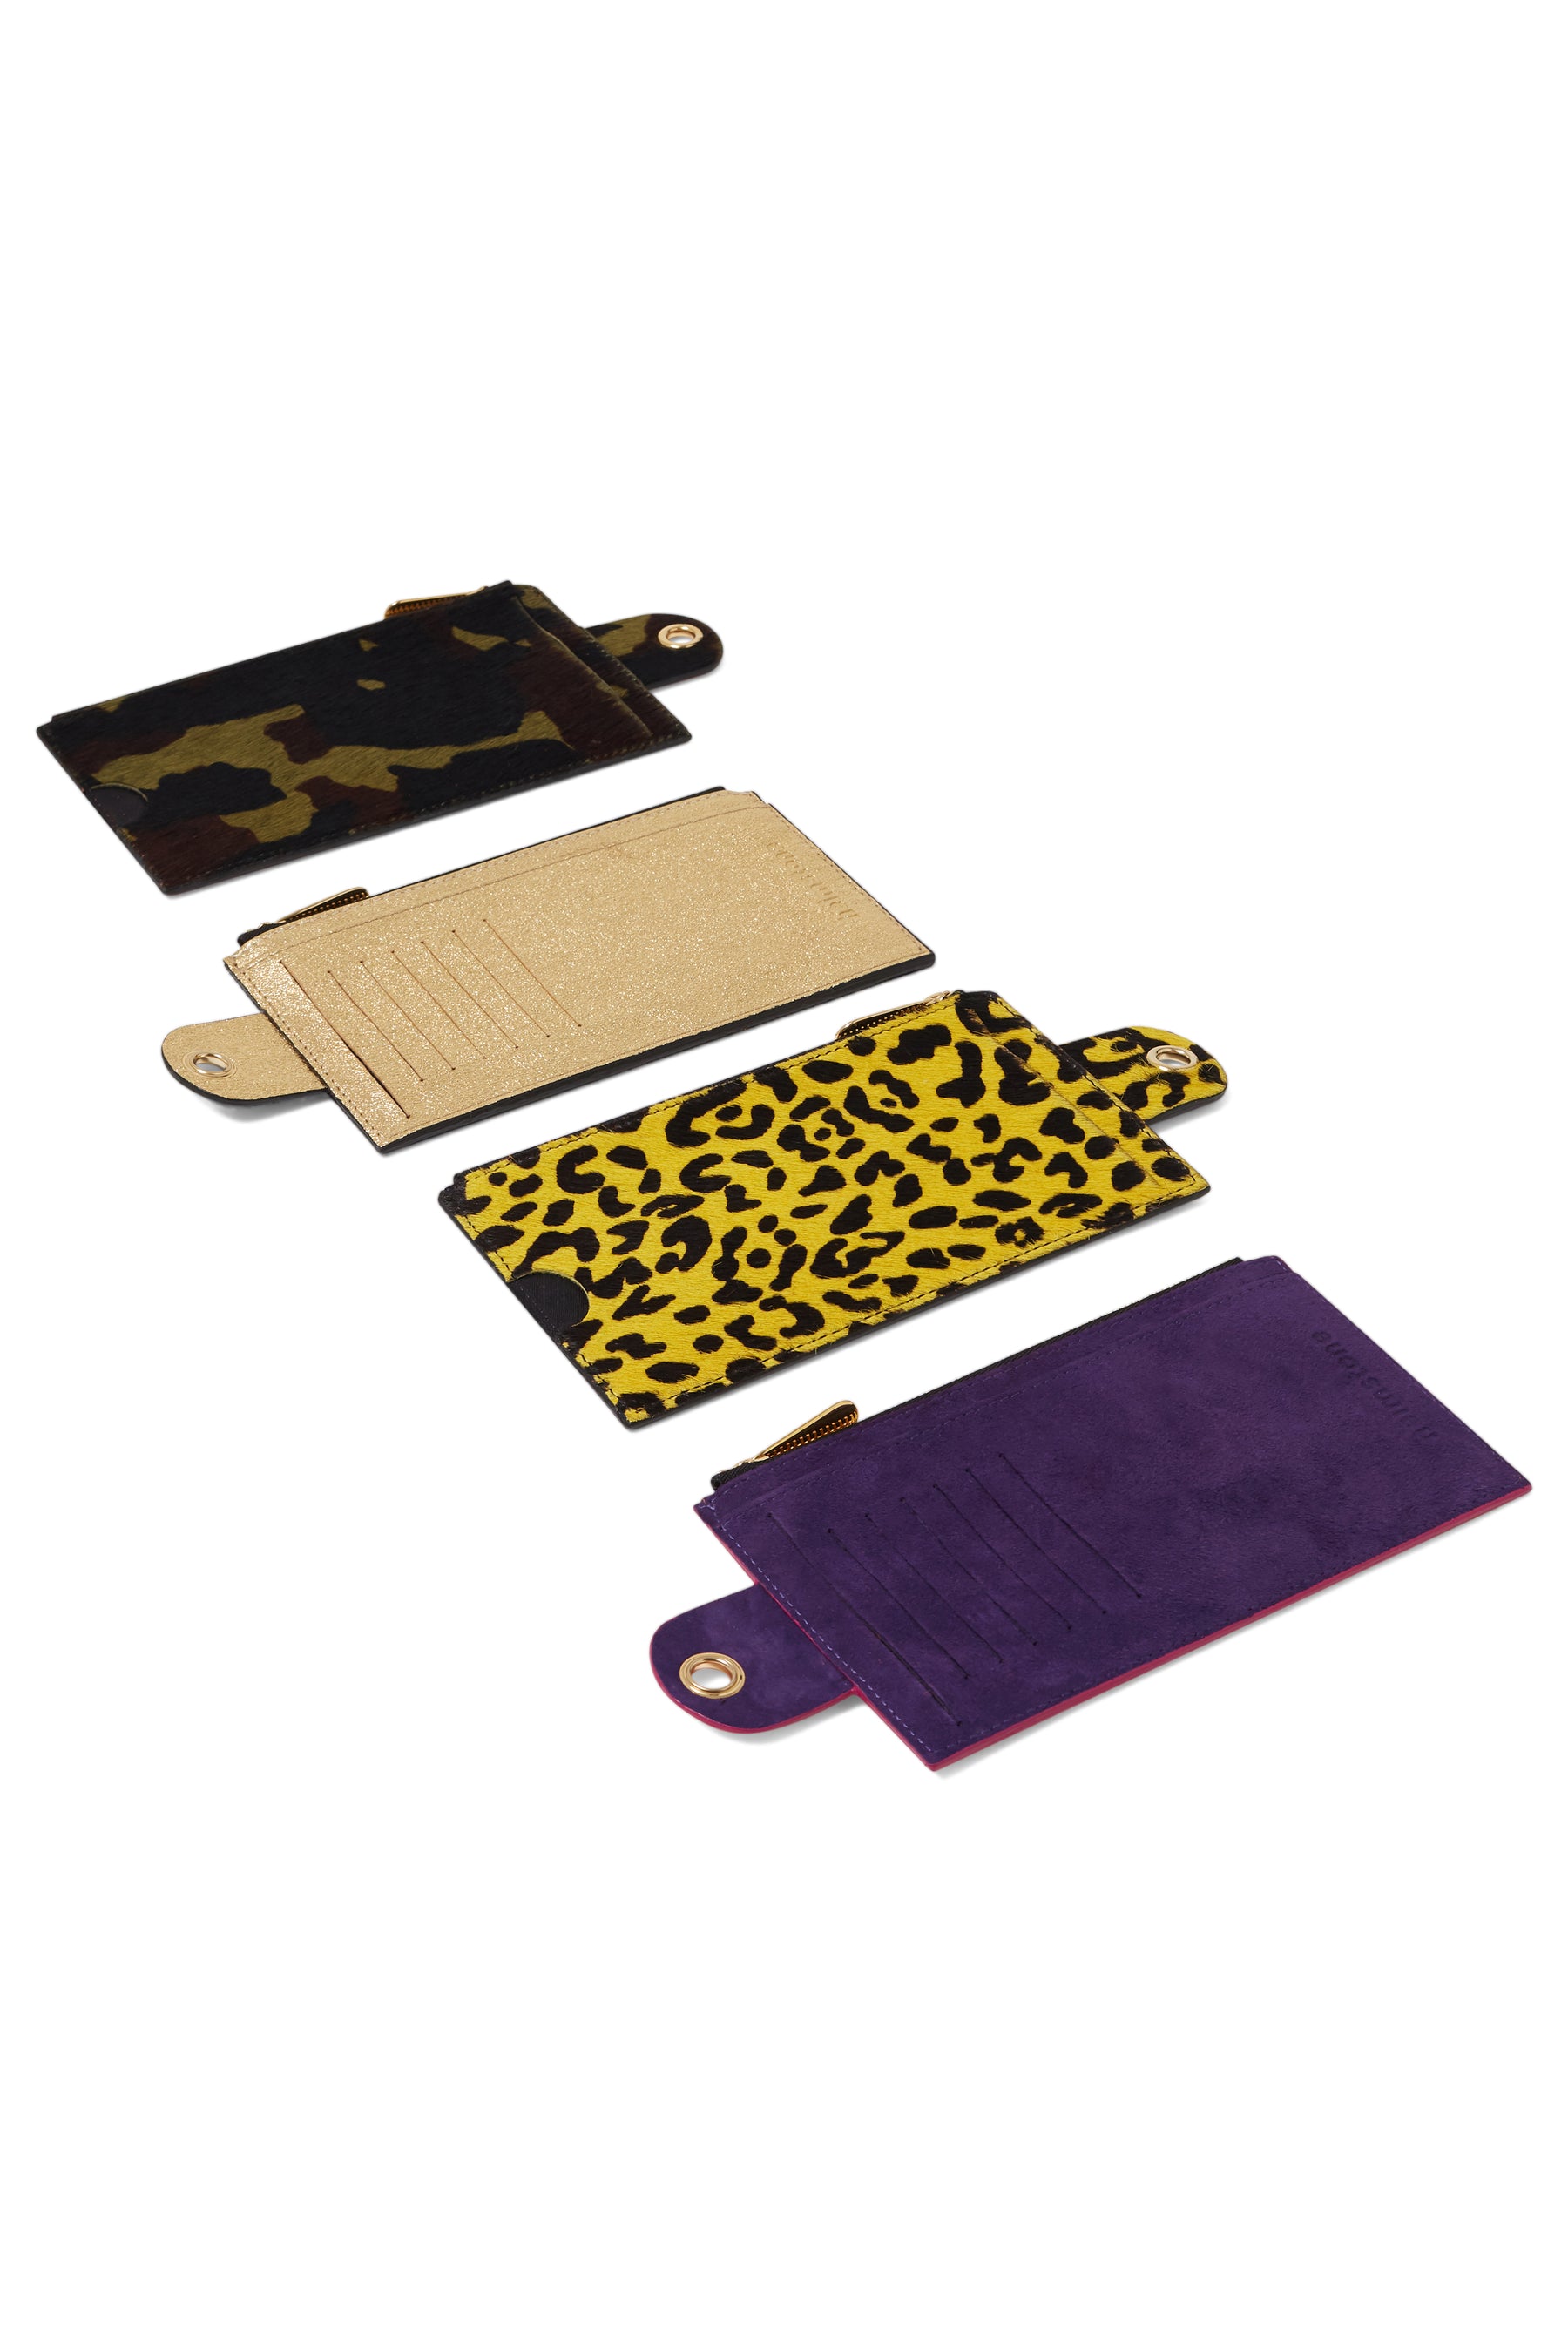 The Minis - Large neck wallet in blue Cheetah printed leather